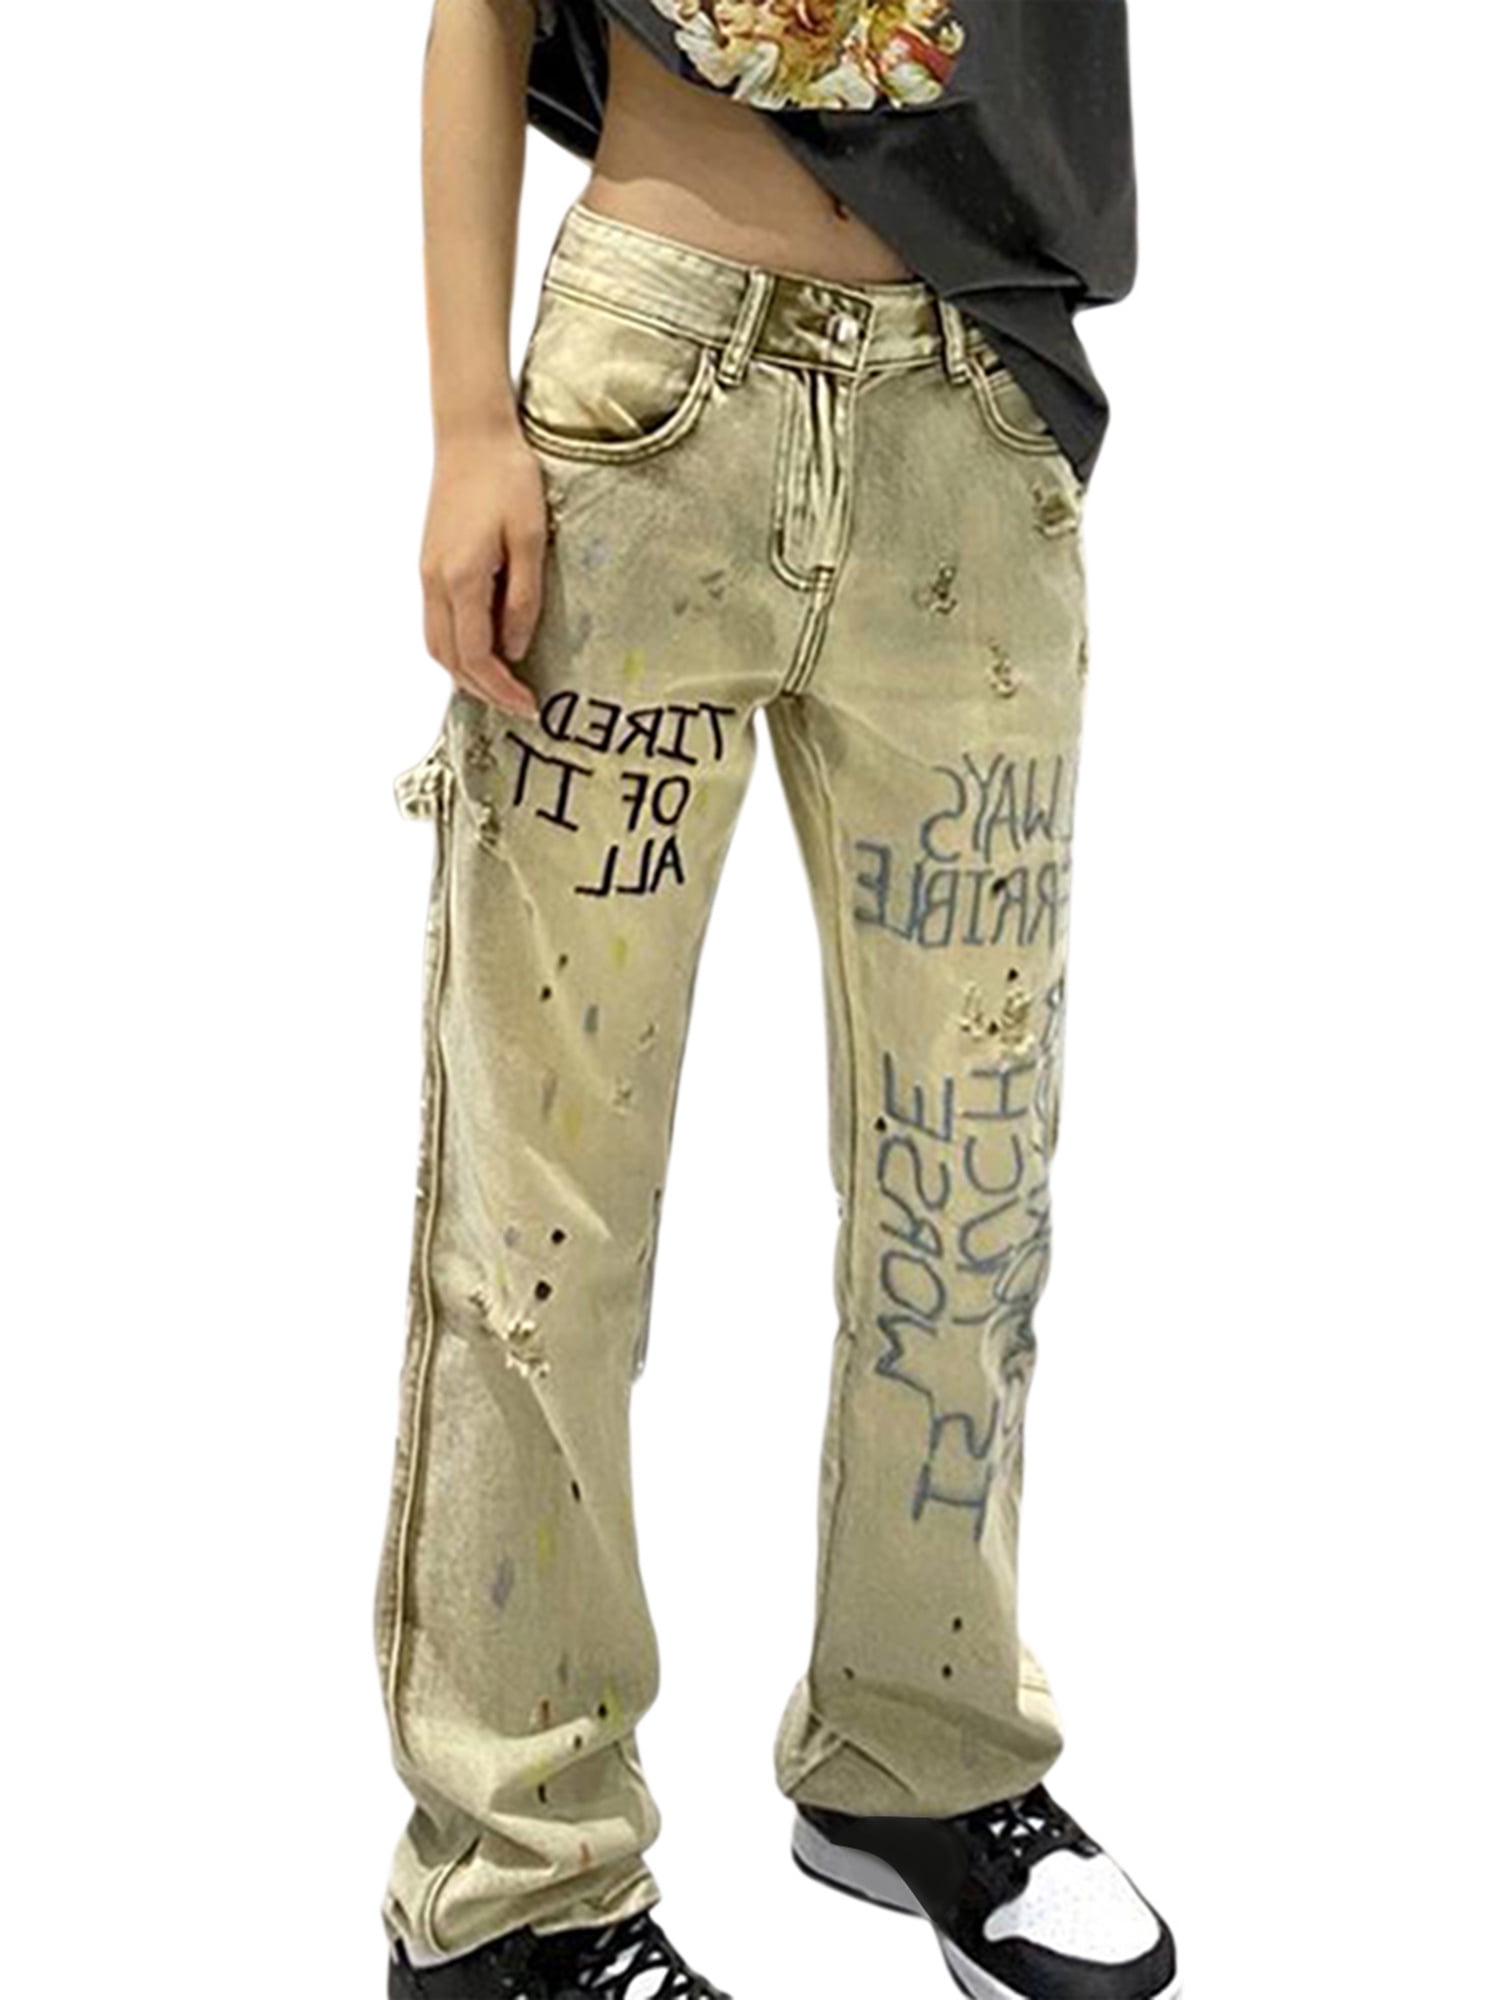 Women's Jeans Trousers Baggy Boyfriend Chino Style Pages Stripes Autumn Vintage